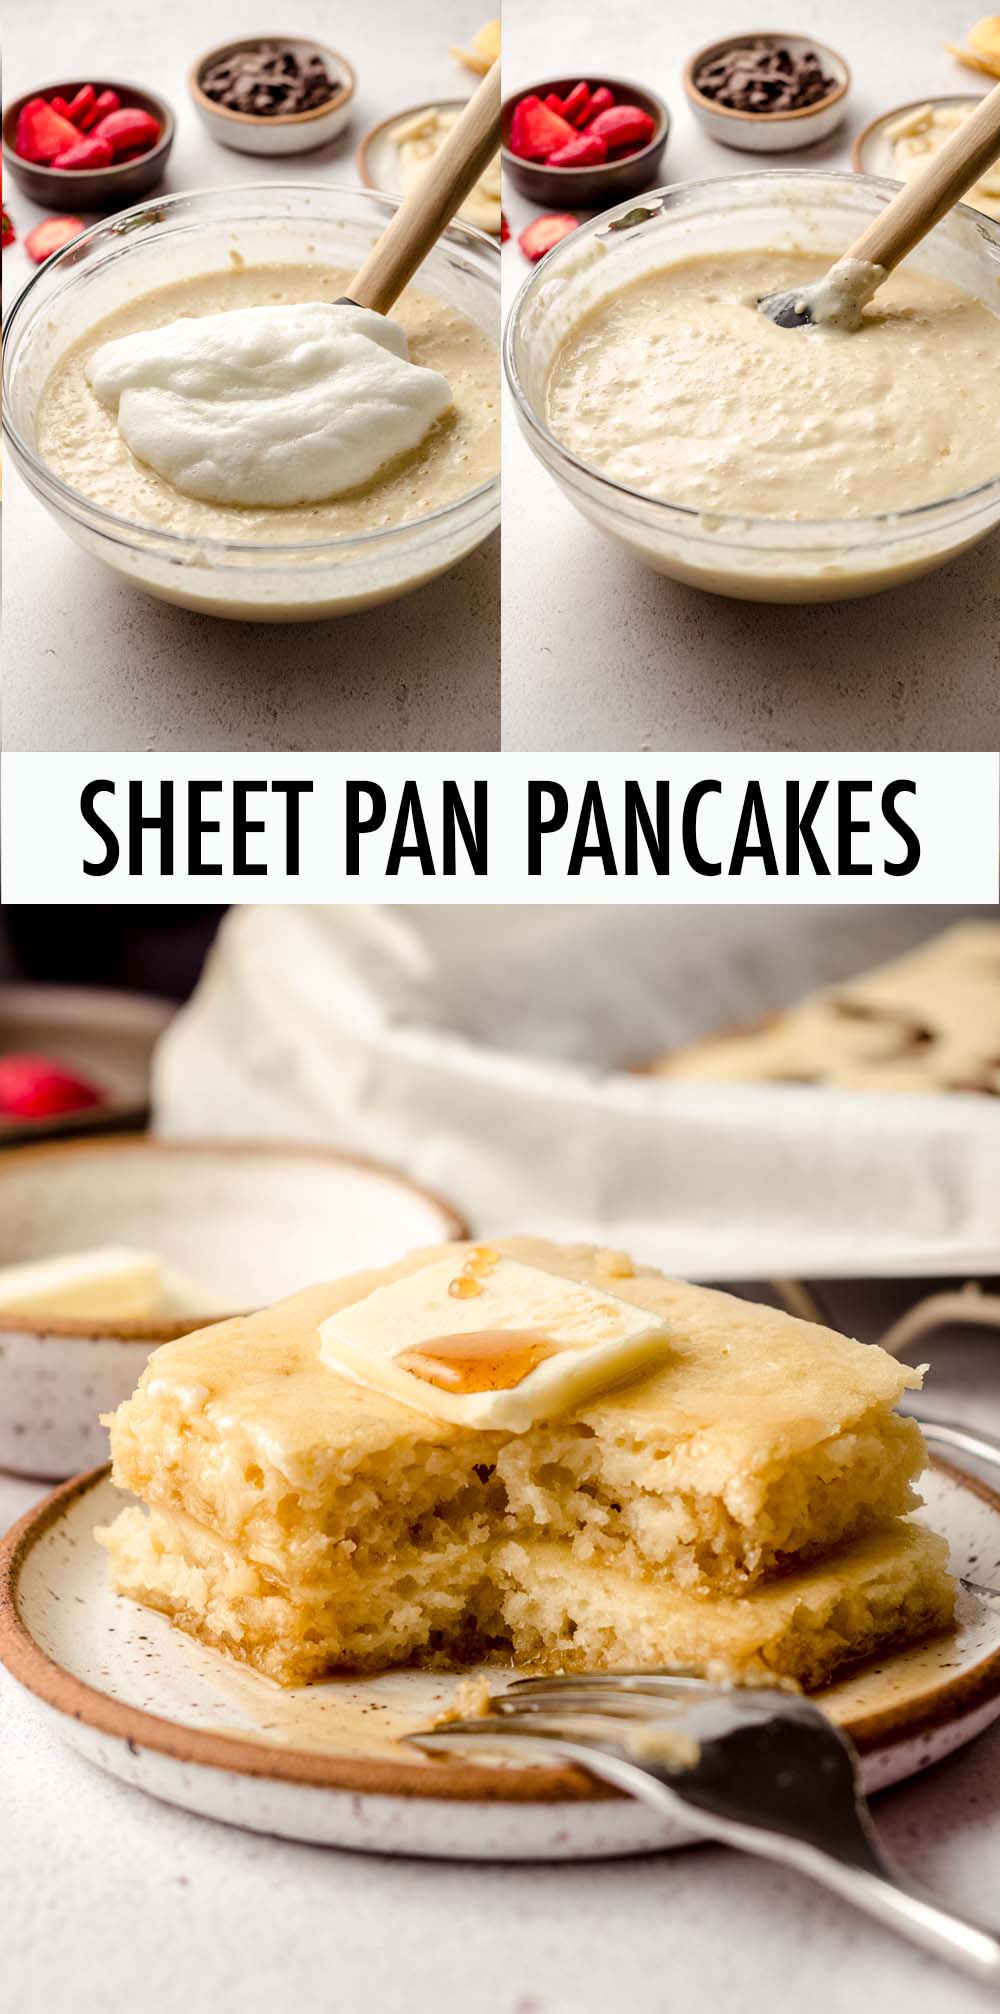 Whip up some light and fluffy pancakes without standing over a skillet! Make your next batch of pancakes in the oven with these simple and easy sheet pan pancakes. via @frshaprilflours